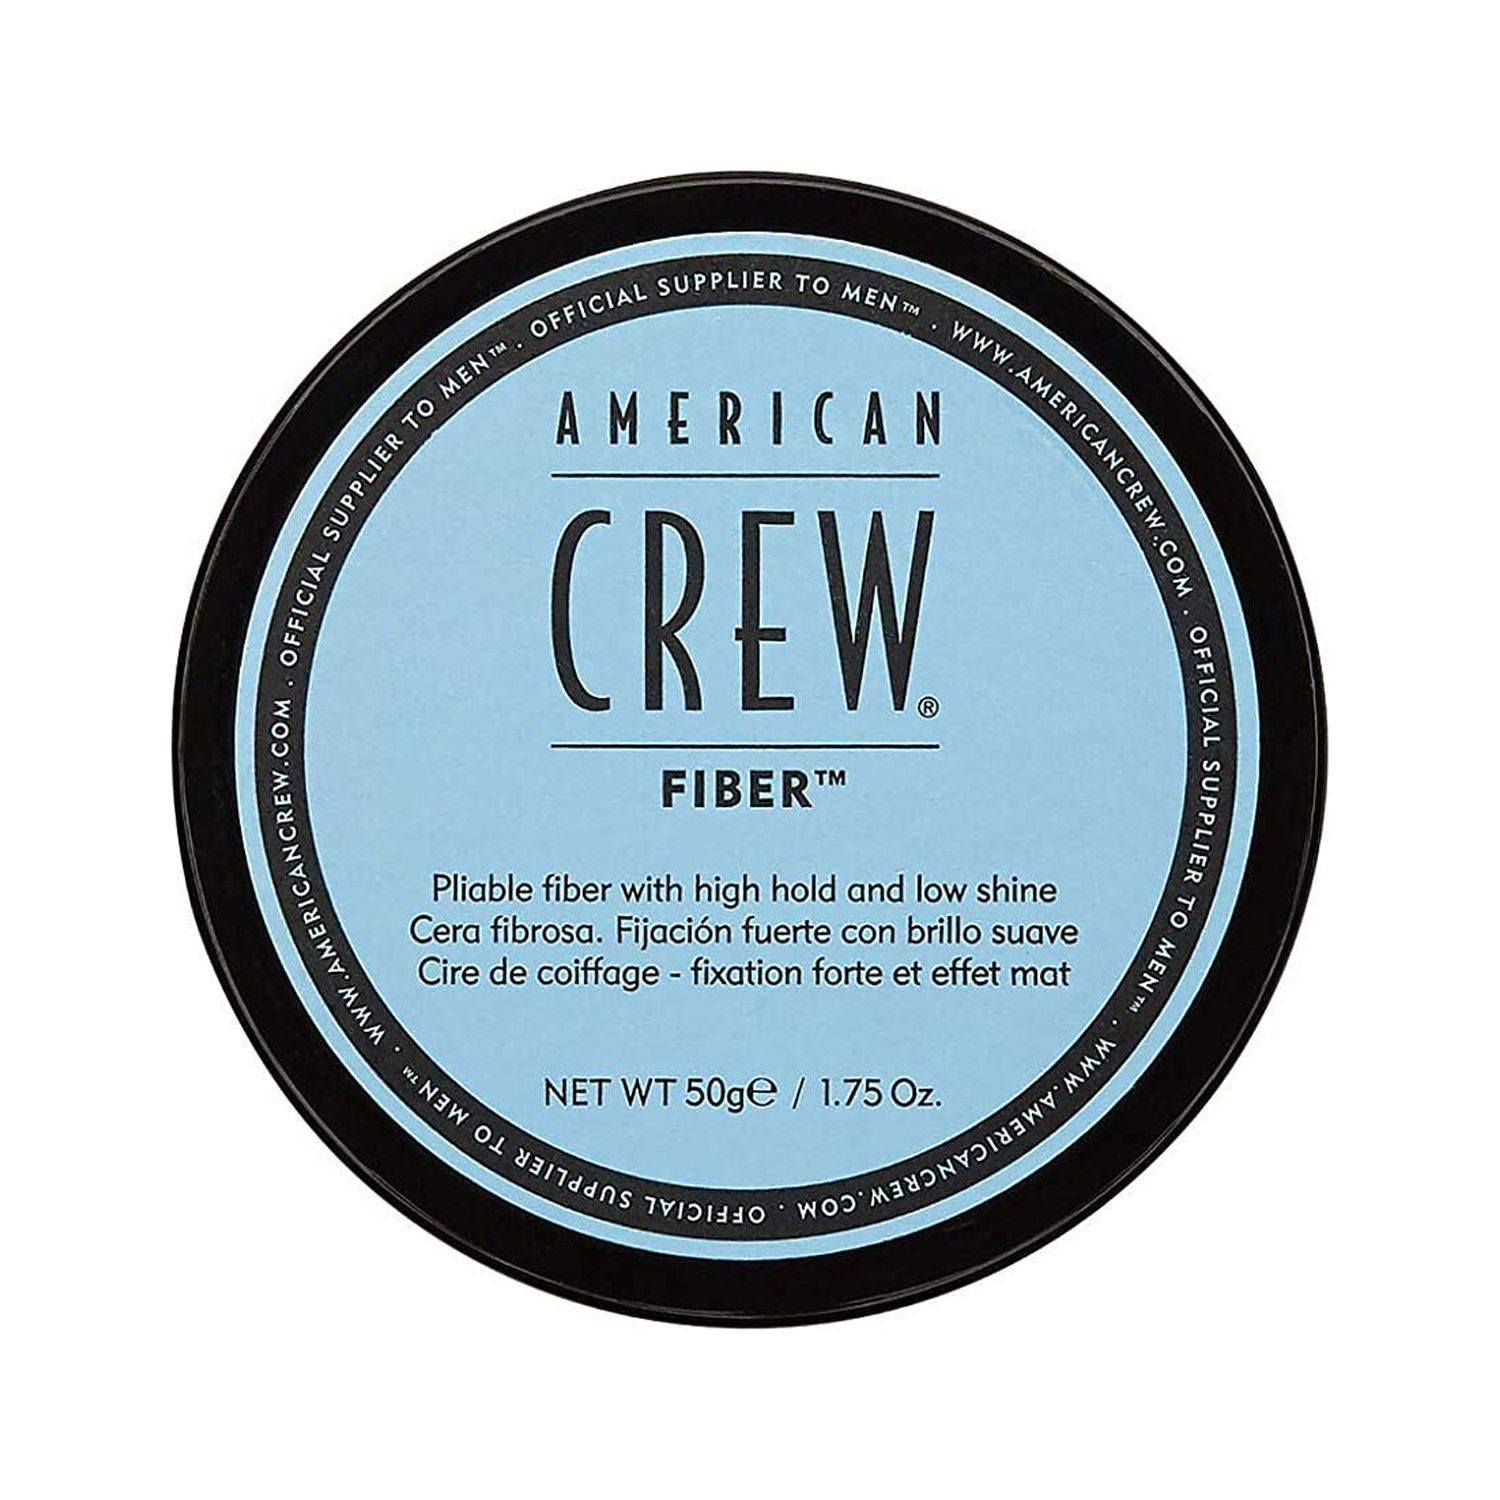 American Crew Fiber Pliable Molding Creme For Men 3 Ounces, PACK OF 3 - image 1 of 6